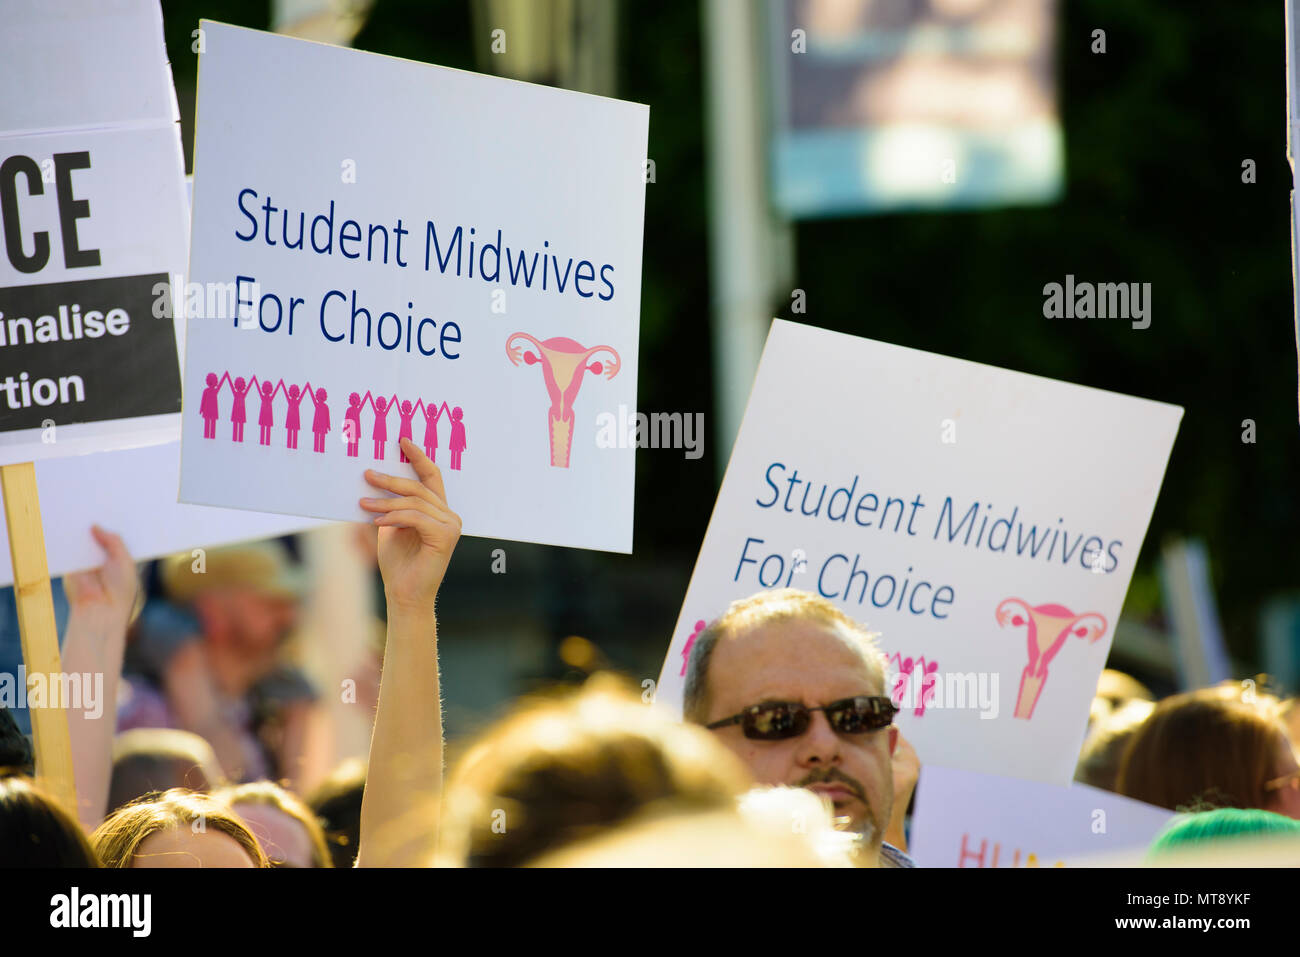 Belfast, Northern Ireland. 28/05/2018 - Protesters hold up placards with the message 'Student midwives for choice'.  Around 500 people gather at Belfast City Hall to call for the decriminalisation of abortion in Northern Ireland.  It comes the day after a referendum held in the Republic of Ireland returned a substantial 'Yes' to removing the 8th amendment to the constitution, which gives equal right of life to both the mother and baby, effectively banning abortion in all circumstances. Stock Photo